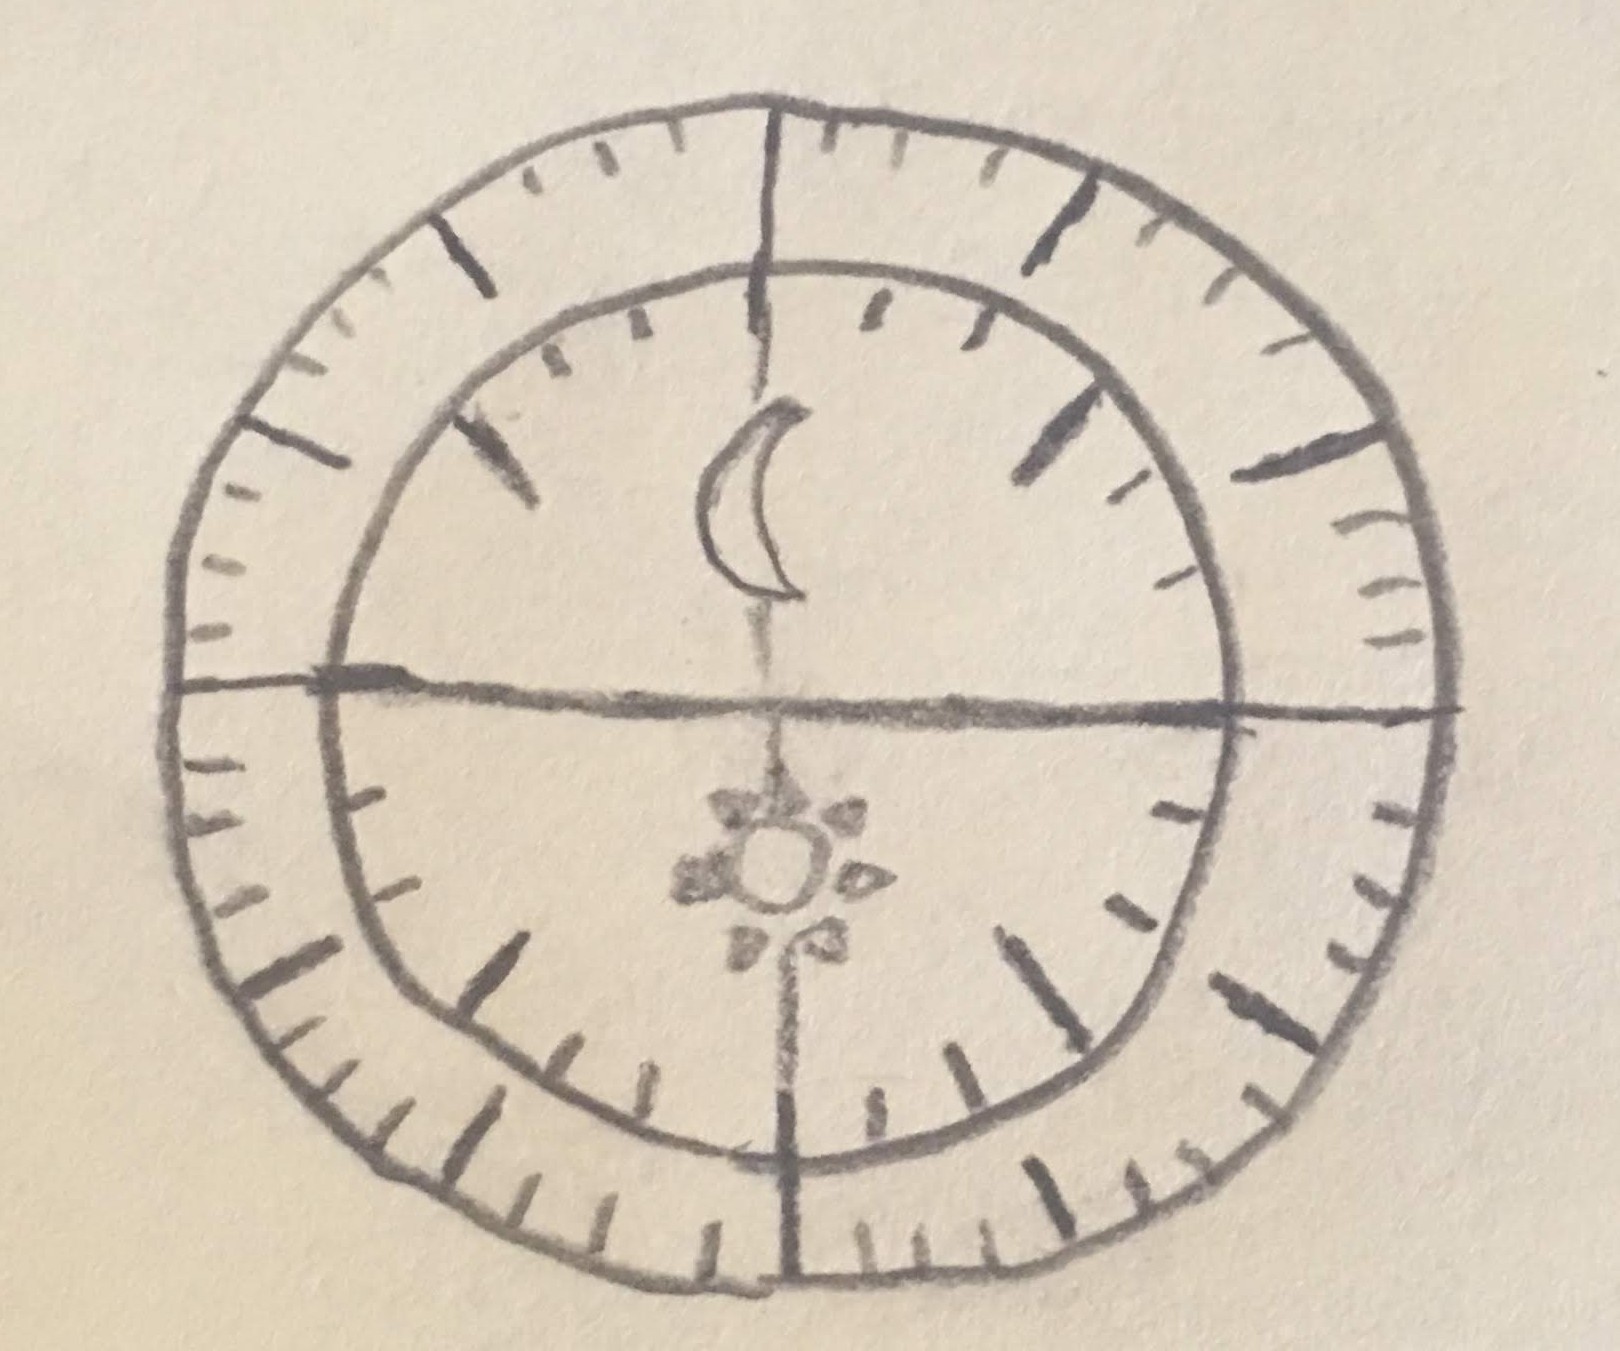 a crude drawing of a graphical clock